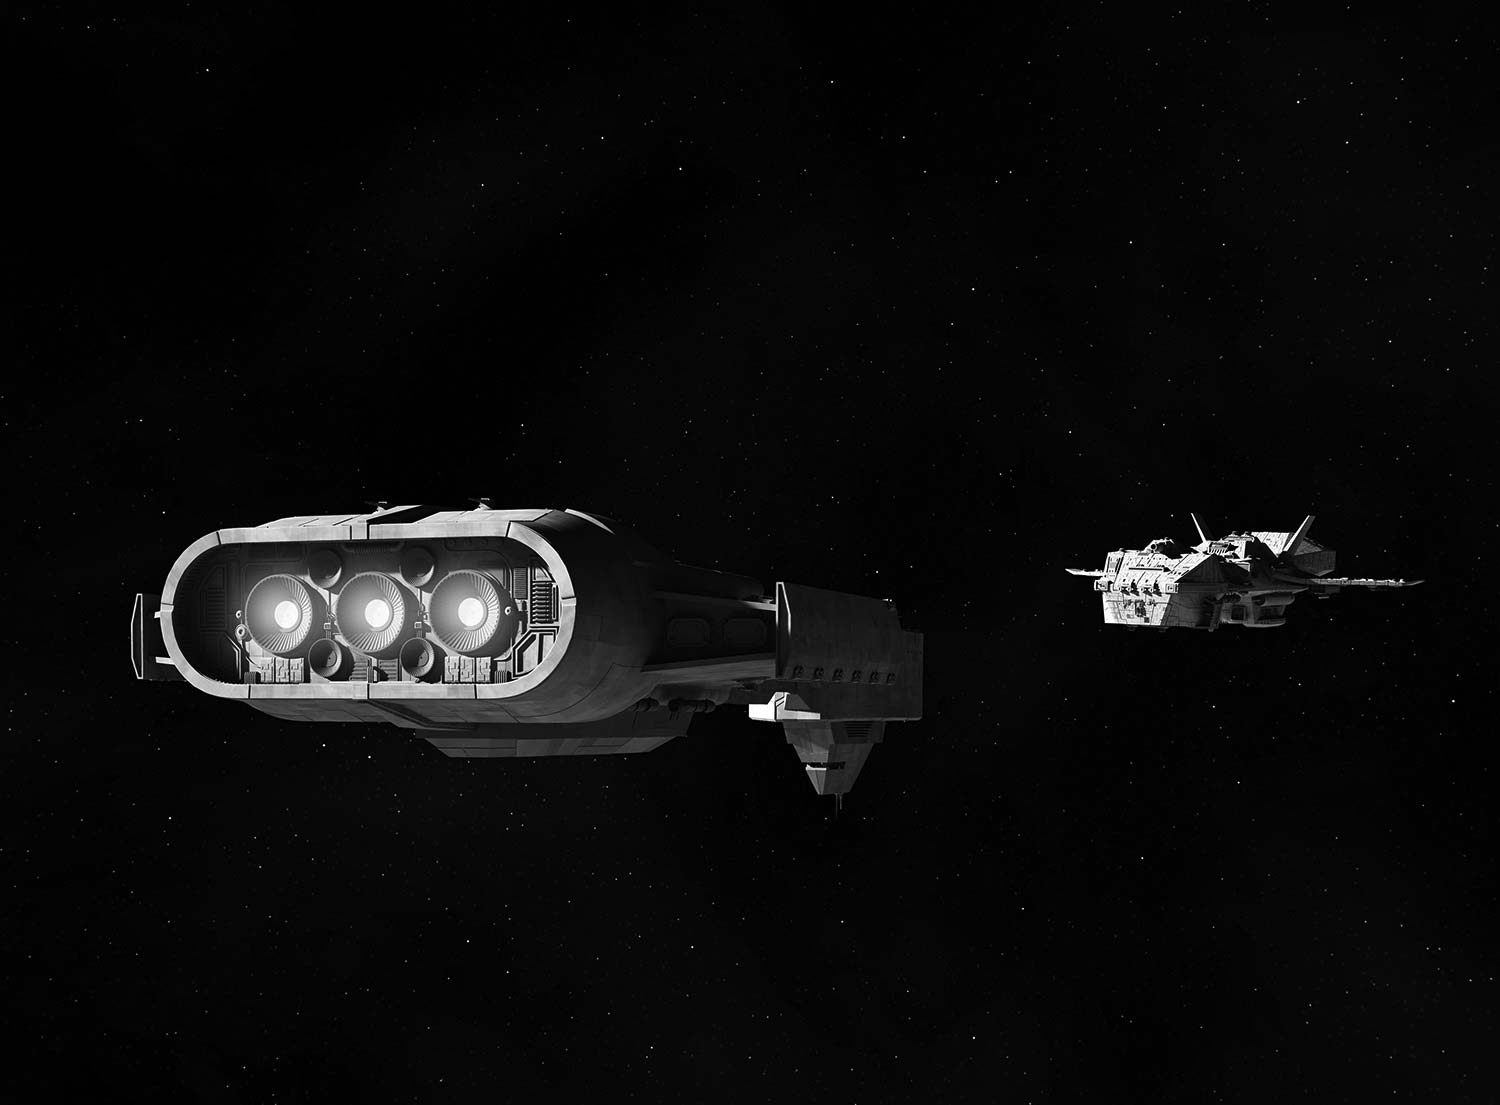 image of two shuttles meeting on a black backgroun